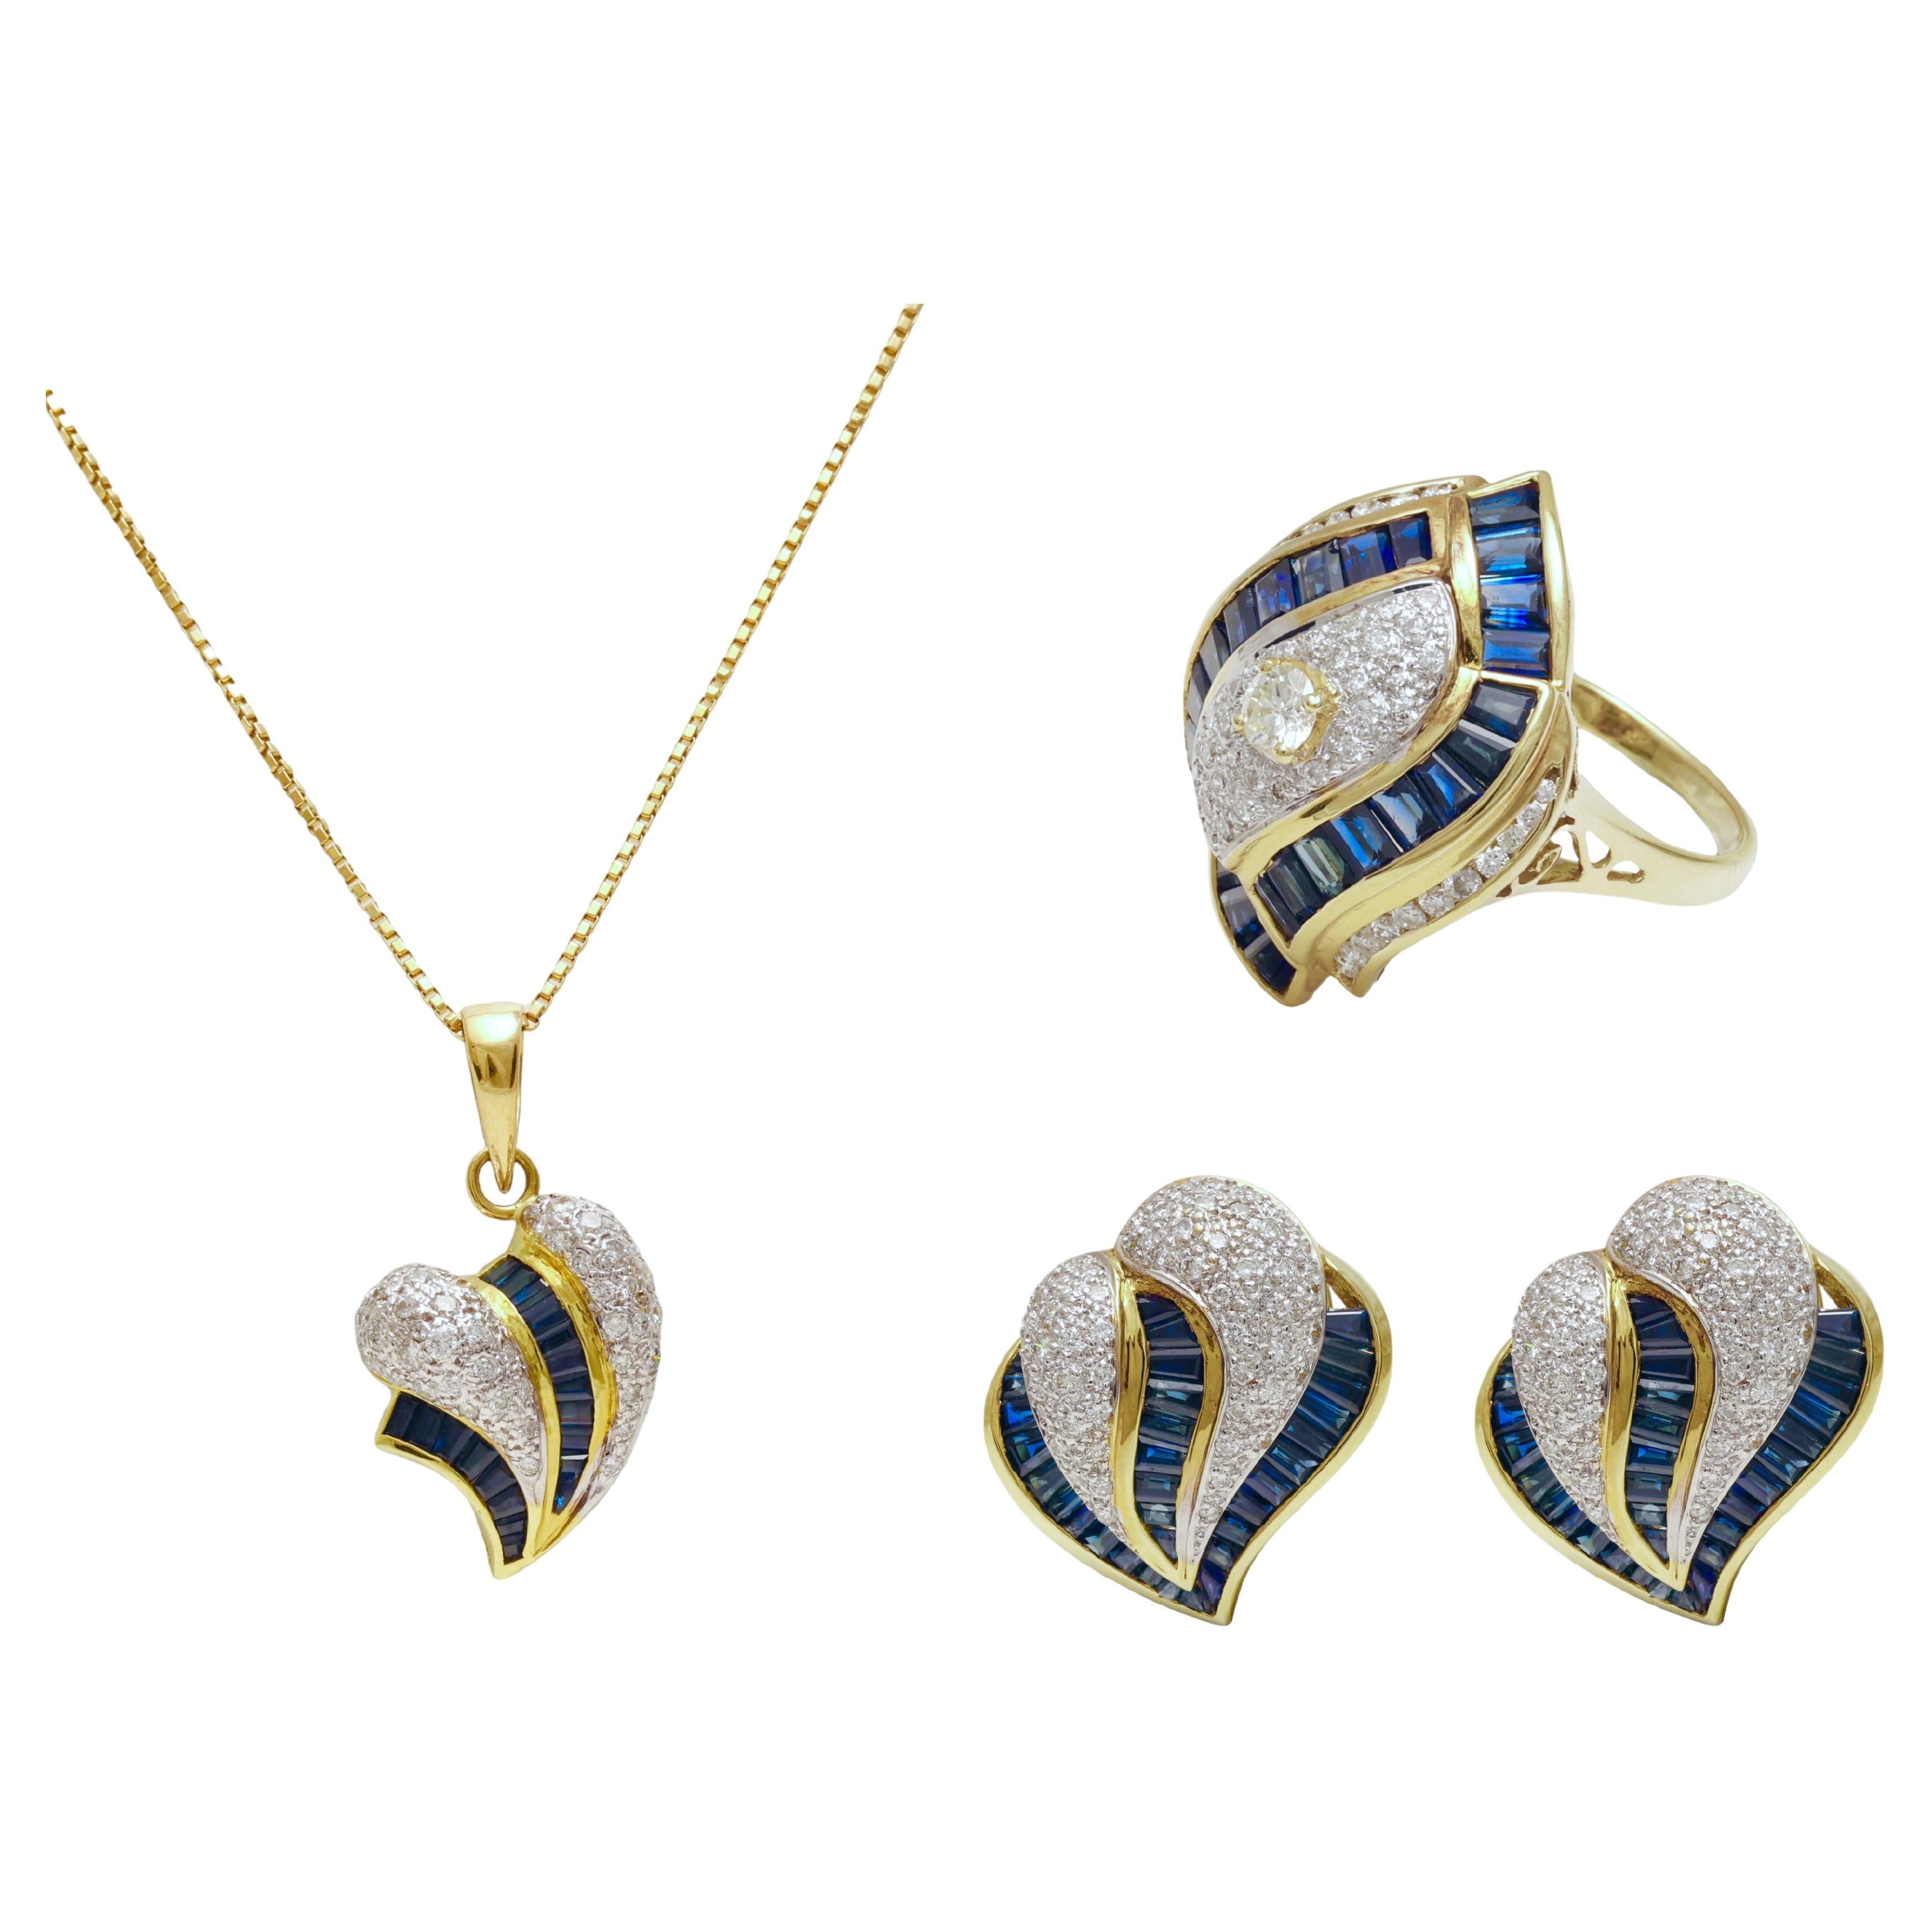 Set of 18 kt. Yellow Gold Earrings, Necklace, Ring with Sapphires & Diamonds